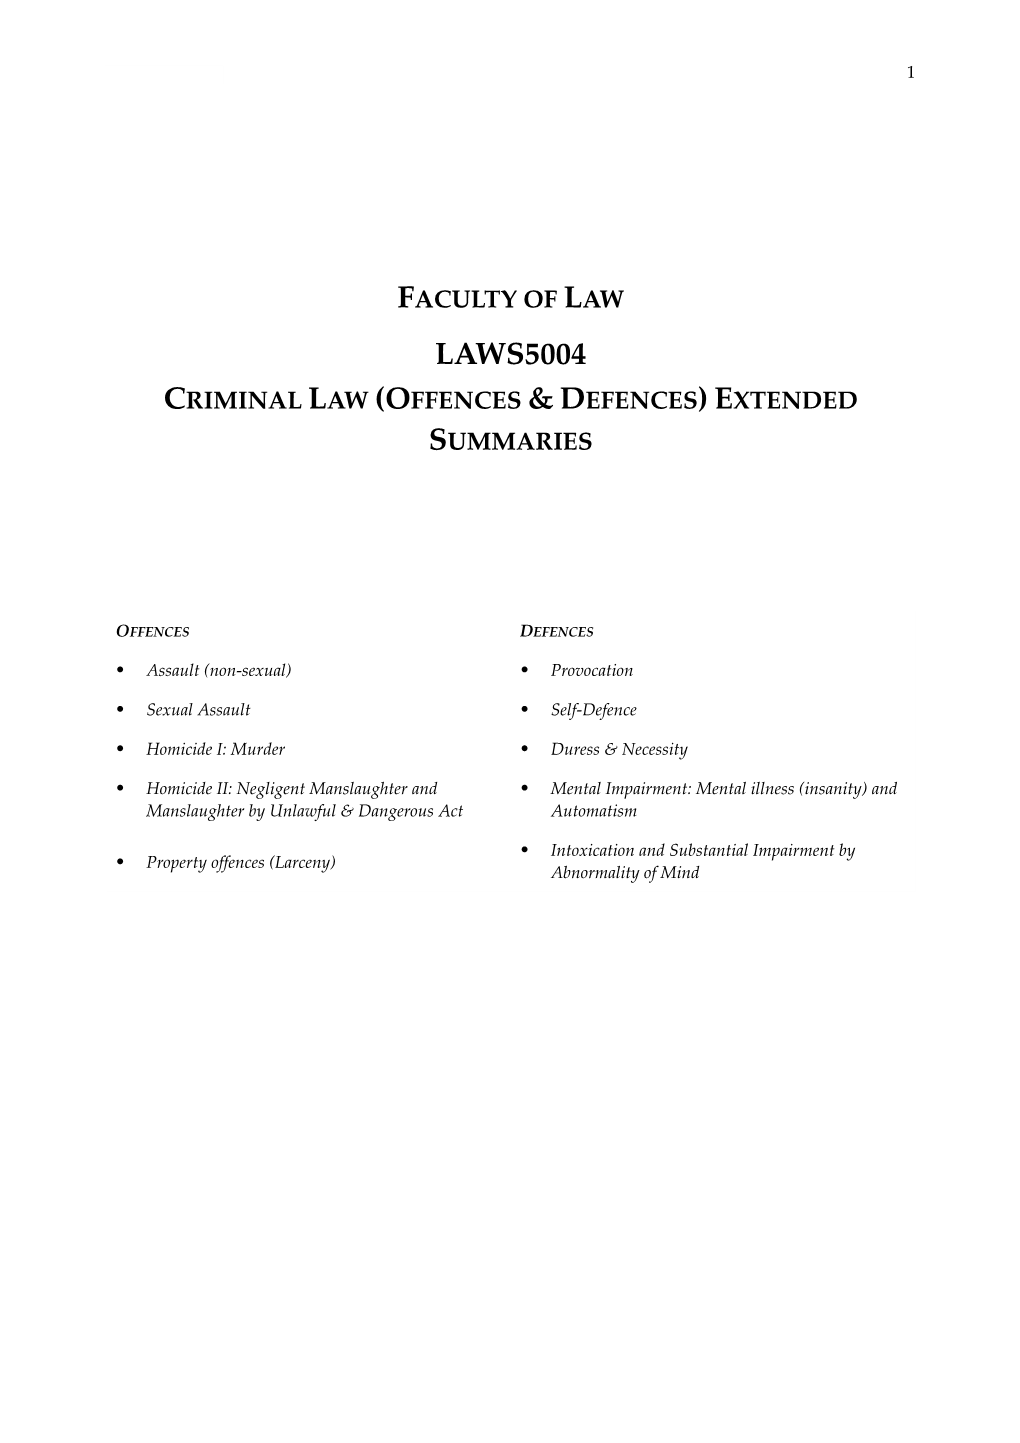 Faculty of Law Laws5004 Criminal Law (Offences & Defences) Extended Summaries